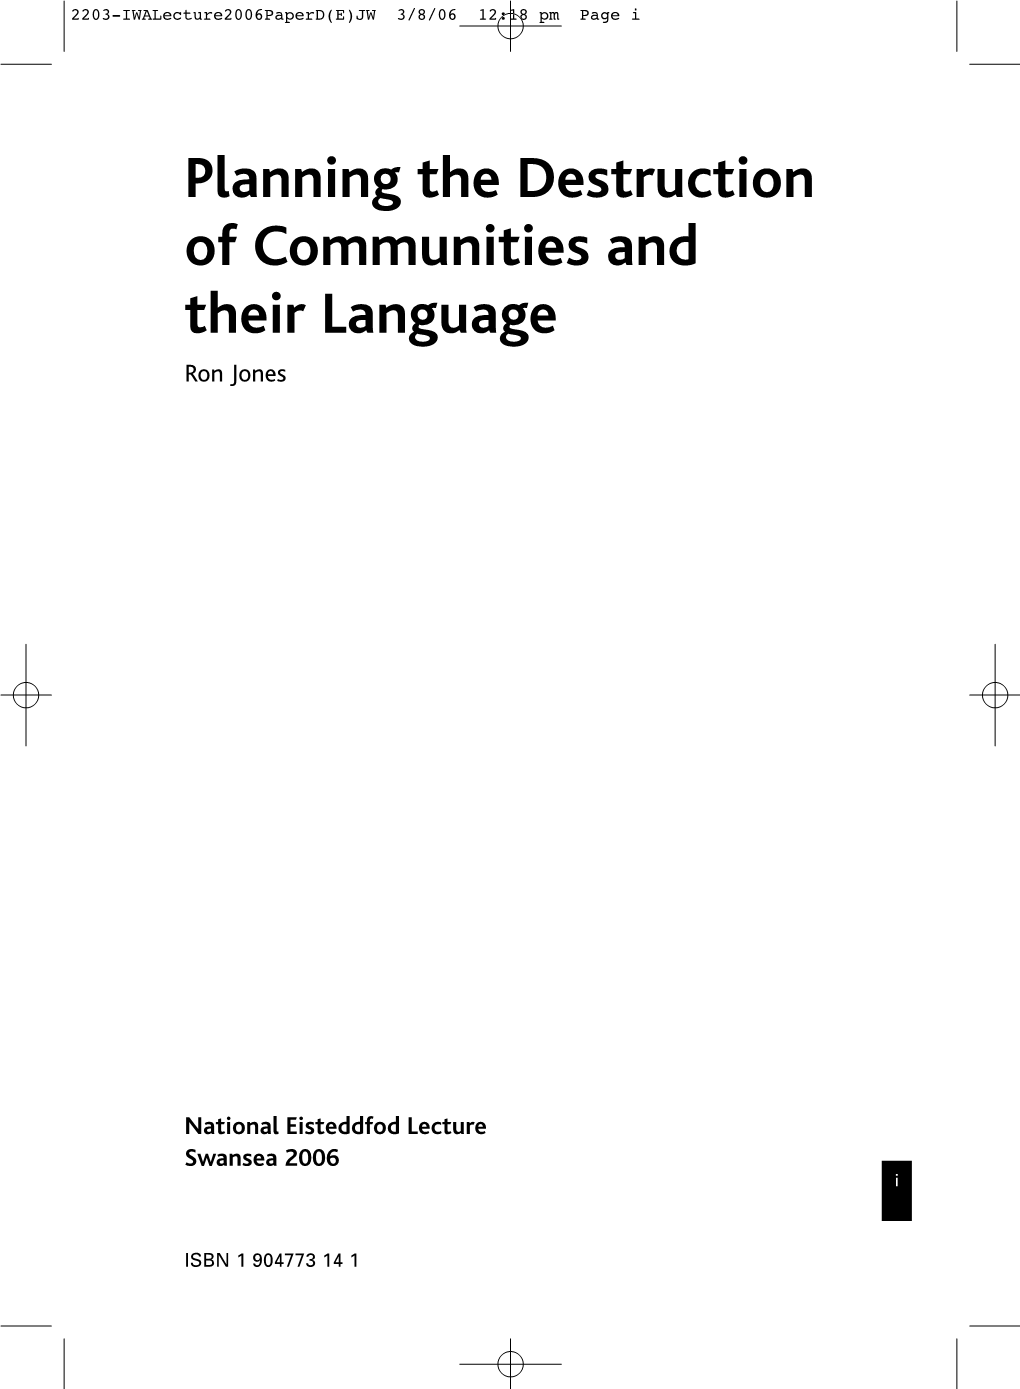 Planning the Destruction of Communities and Their Language Ron Jones